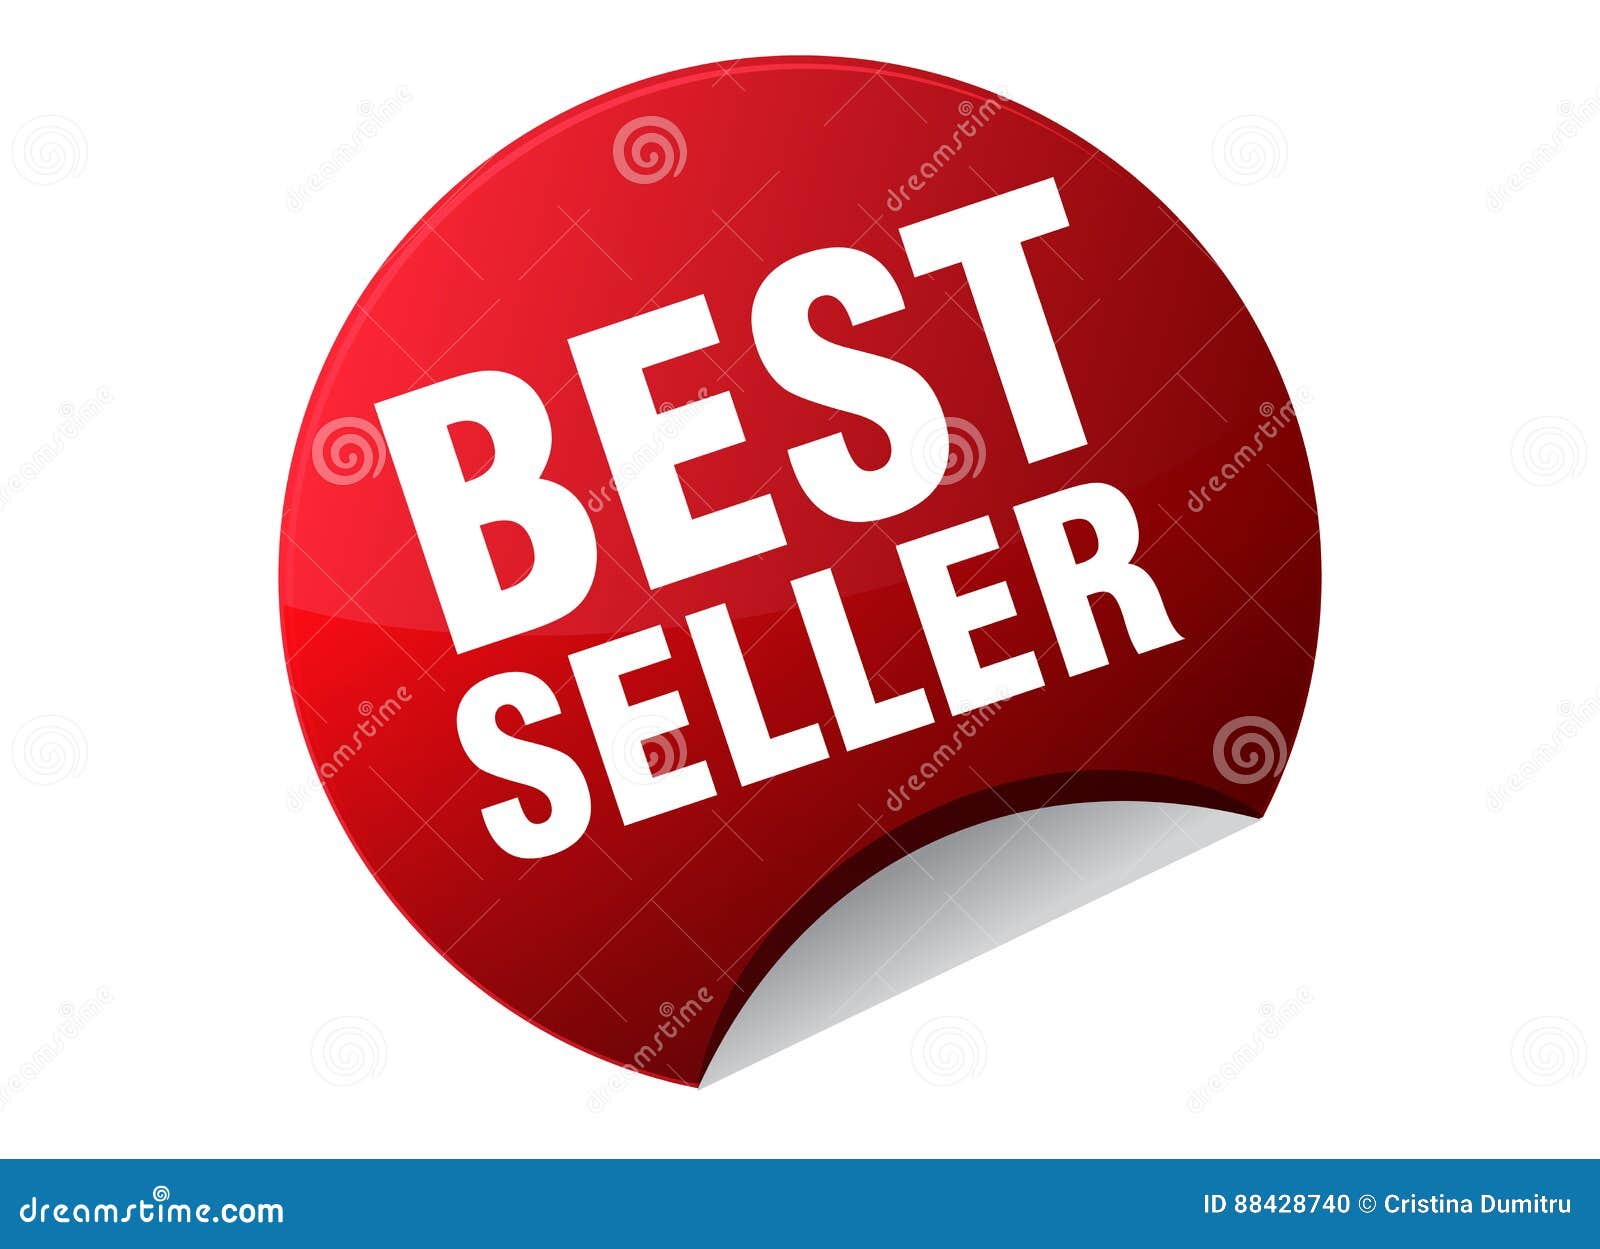 Best Seller Icon. Sign.Symbol.Logo Stock Vector - Illustration of  advertisement, product: 88428740